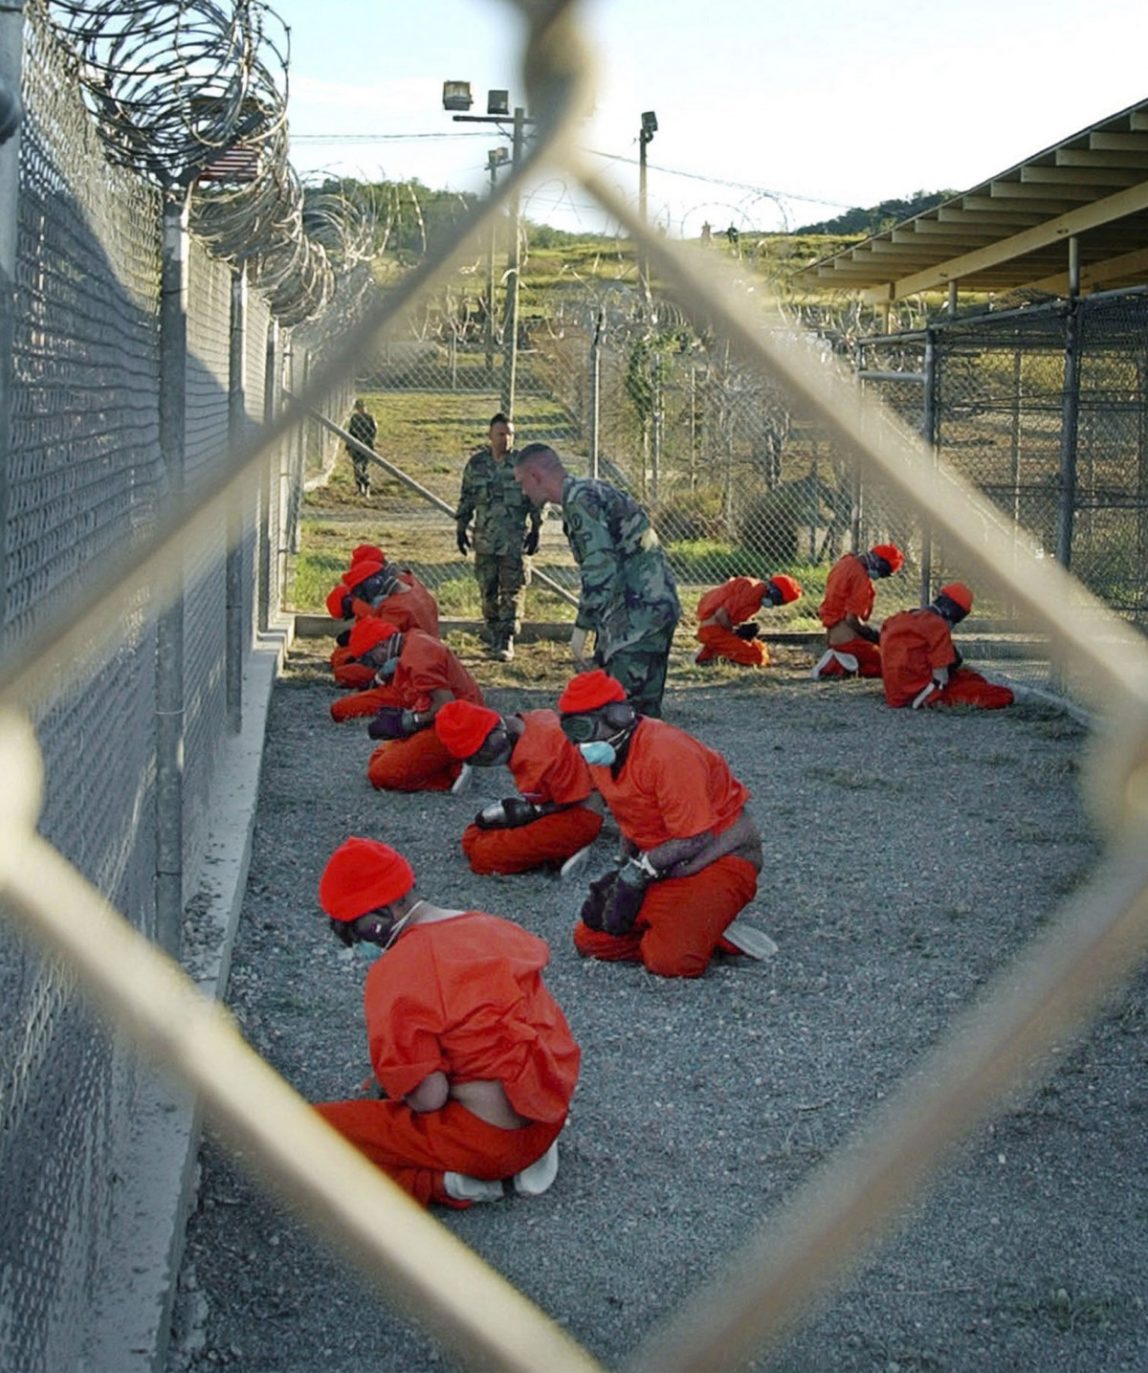 In this Jan. 11, 2002 file photo, released by the U.S. Department of Defense, detainees wearing orange jump suits sit in a holding area as military police patrol during in-processing at the temporary detention facility Camp X-Ray on Guantanamo Bay U.S. Naval Base in Cuba. (AP Photo/U.S. Navy, Shane T.McCoy, File)